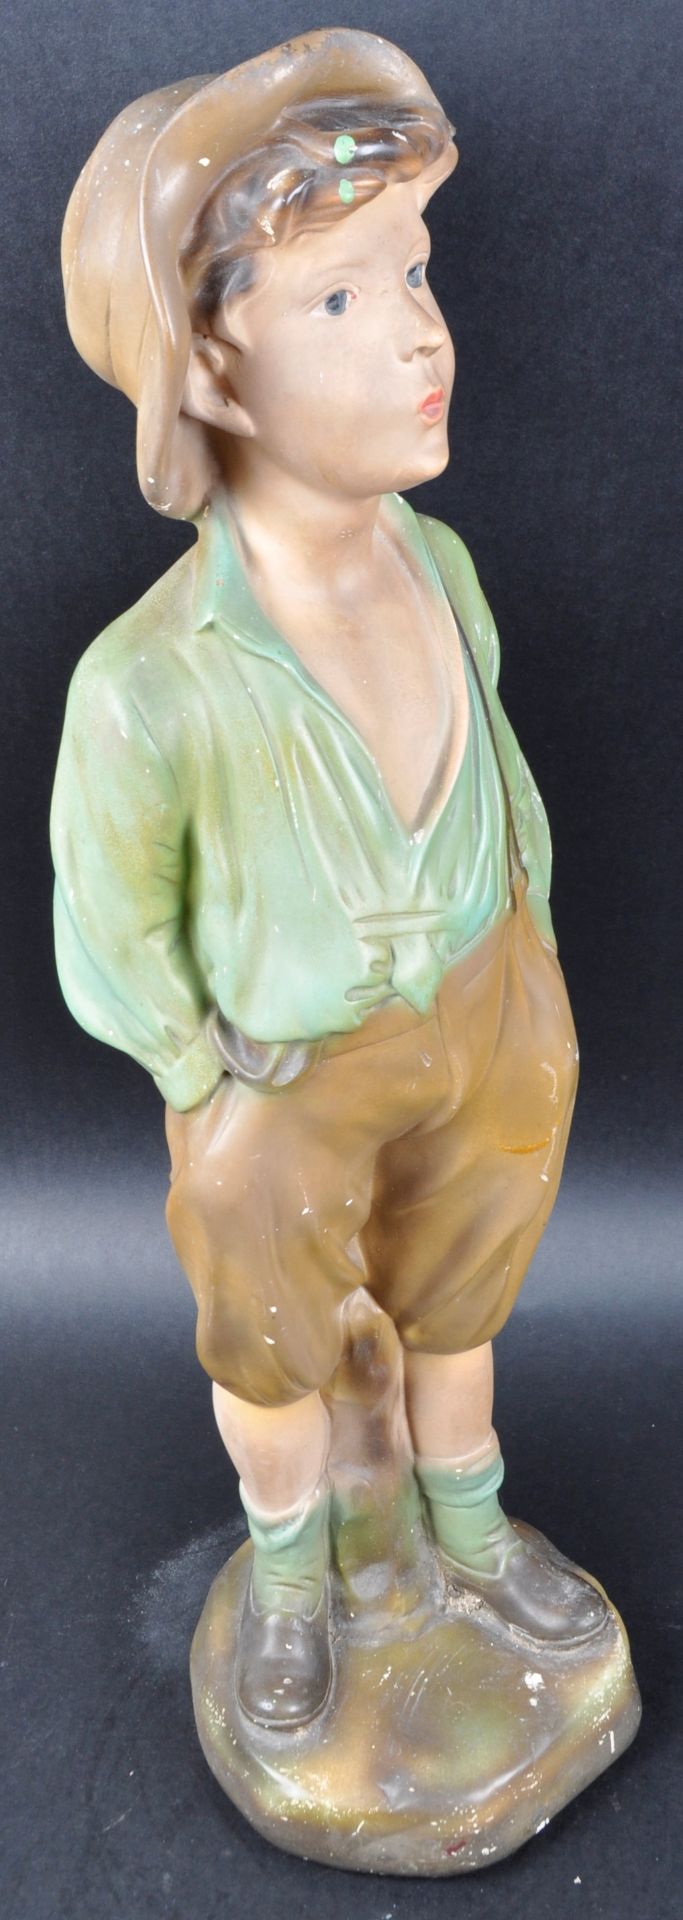 VINTAGE ART DECO CHALKWARE FIGURE OF A YOUNG BOY - Image 2 of 9